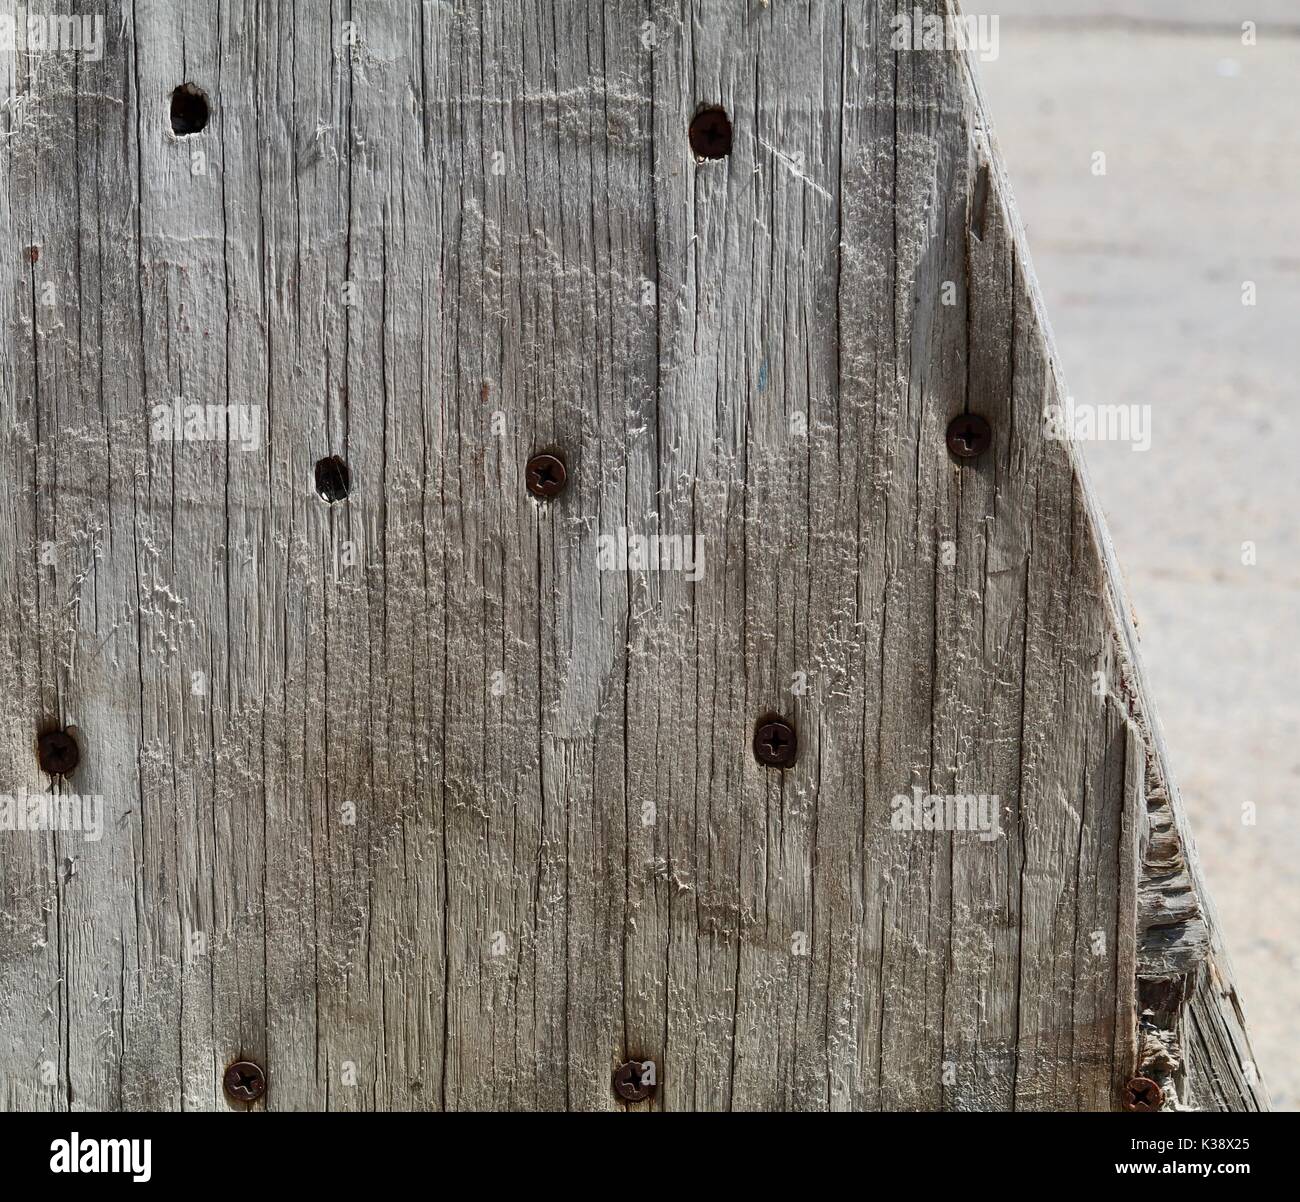 Old grey wood with dark screws showing Stock Photo